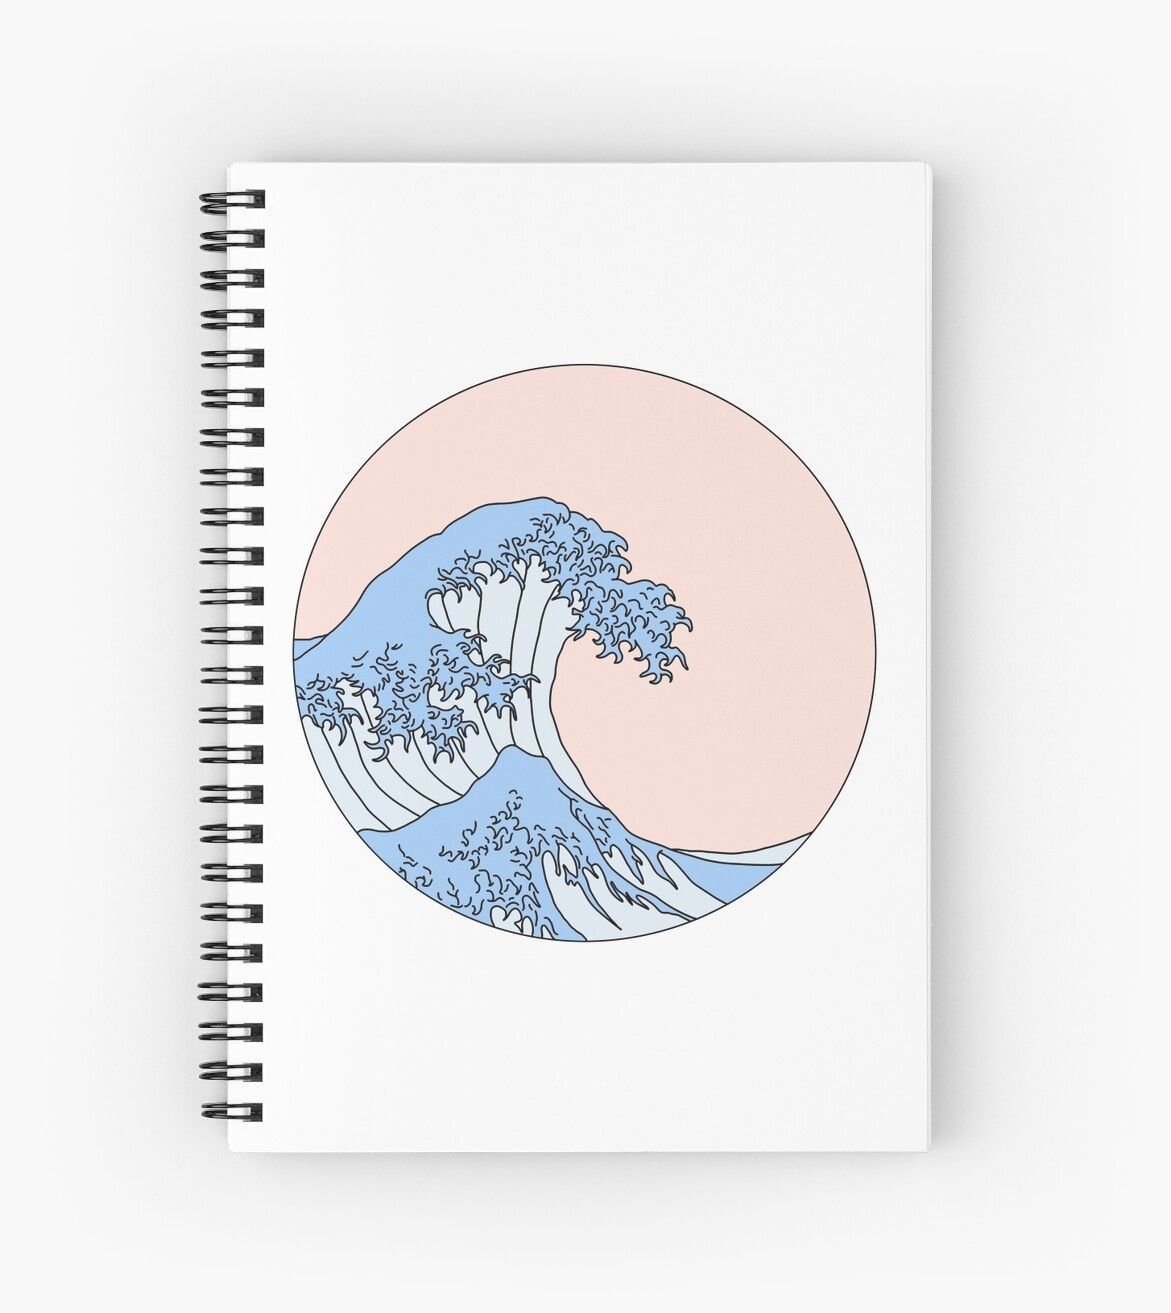 'aesthetic wave' Spiral Notebook by emilyg22 - 'aesthetic wave' Spiral Notebook by emilyg22 -   10 diy Cuadernos aesthetic ideas